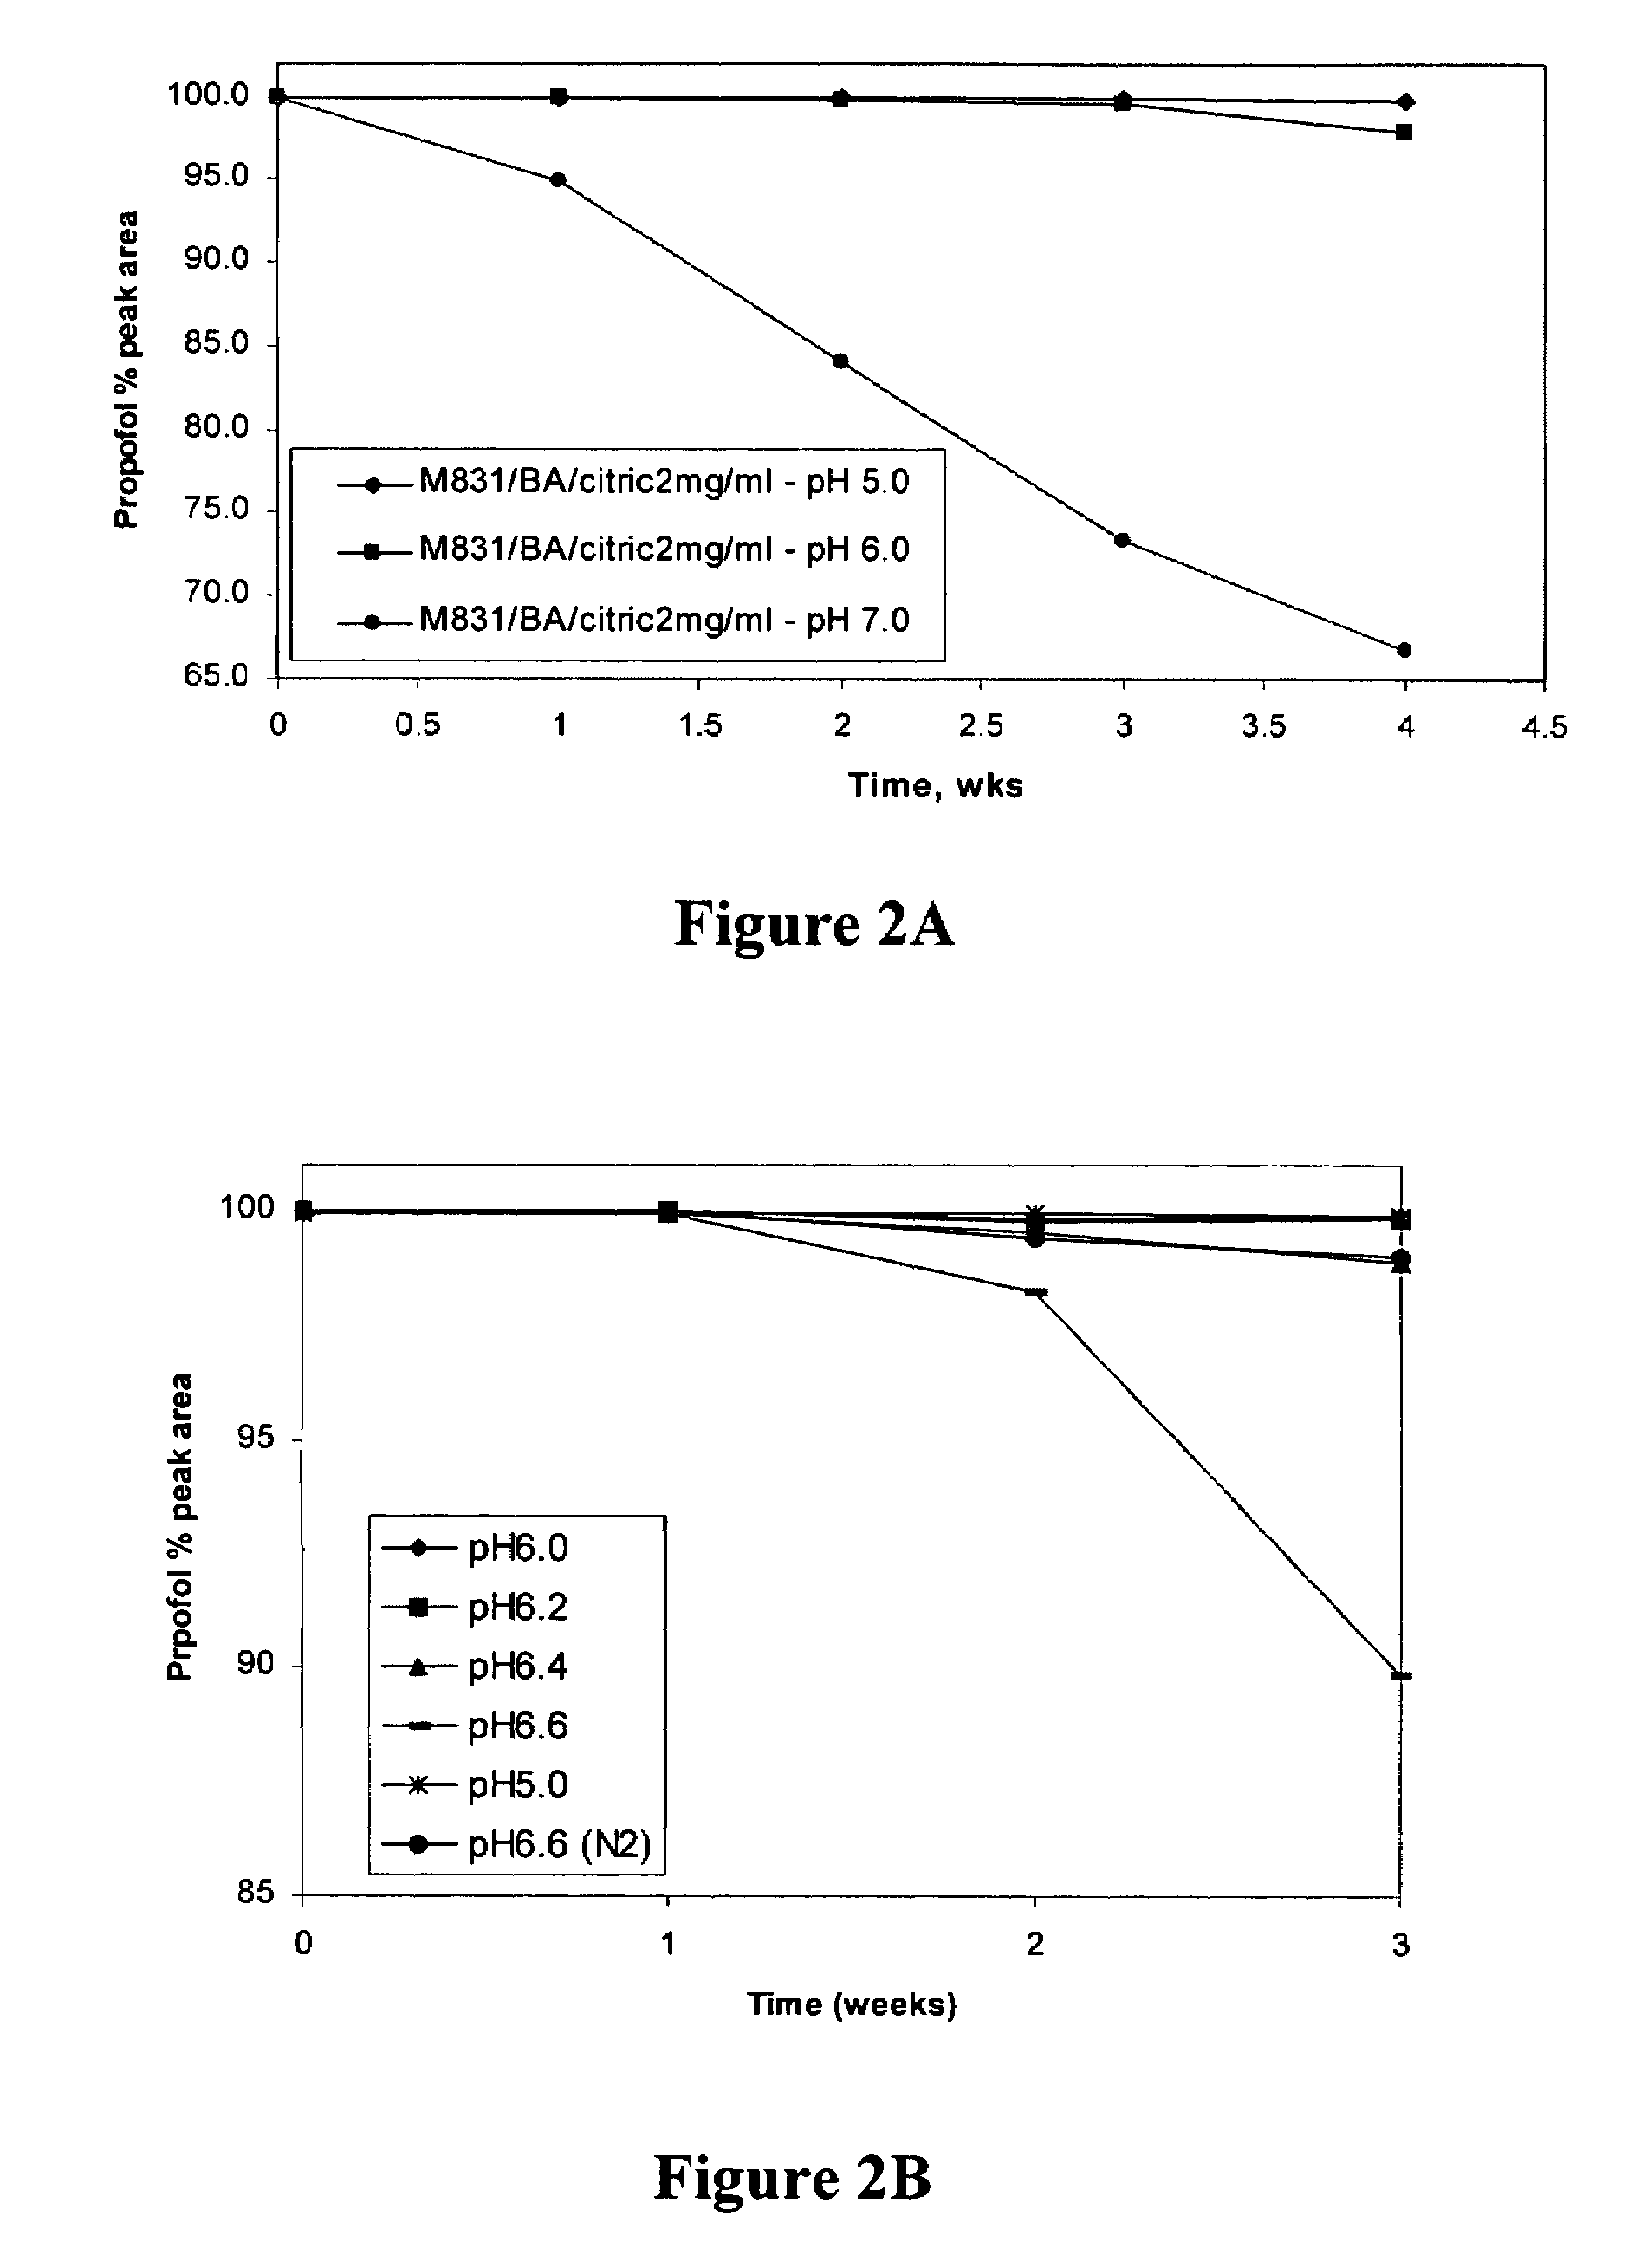 Aqueous pharmaceutical compositions of 2,6-diisopropylphenol (propofol) and their uses